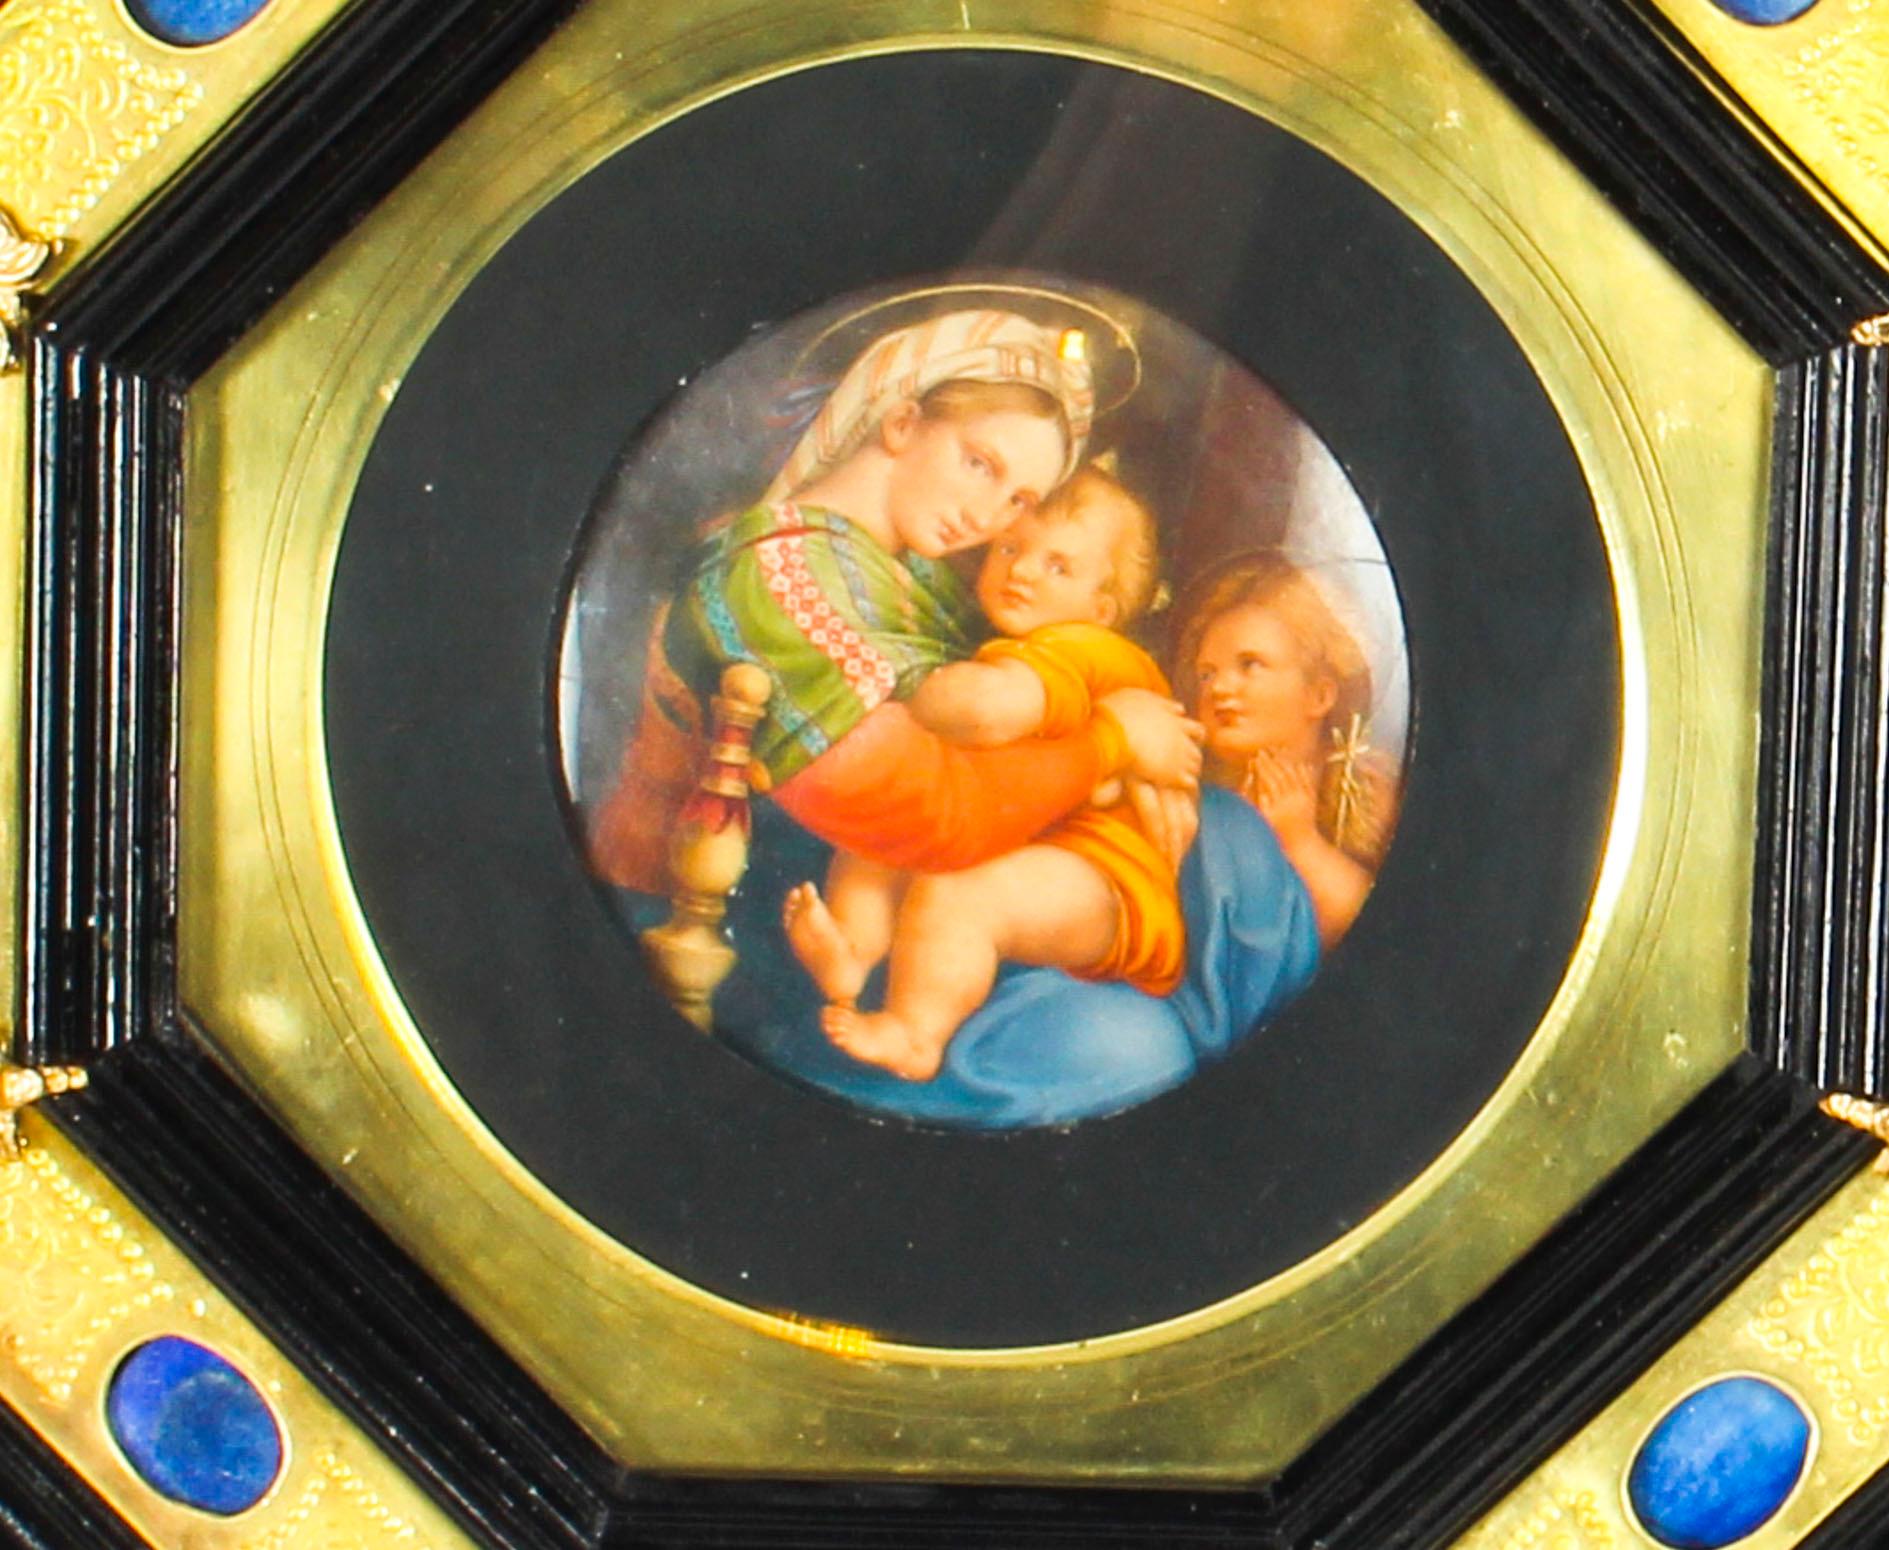 This is a magnificent antique Italian hand-painted oval miniature of the Madonna Della Seggiola, circa 1840 in date. 

This truly stunning oval miniature is housed in a highly decorative ebonised and brass octagonal frame that has a plethora of